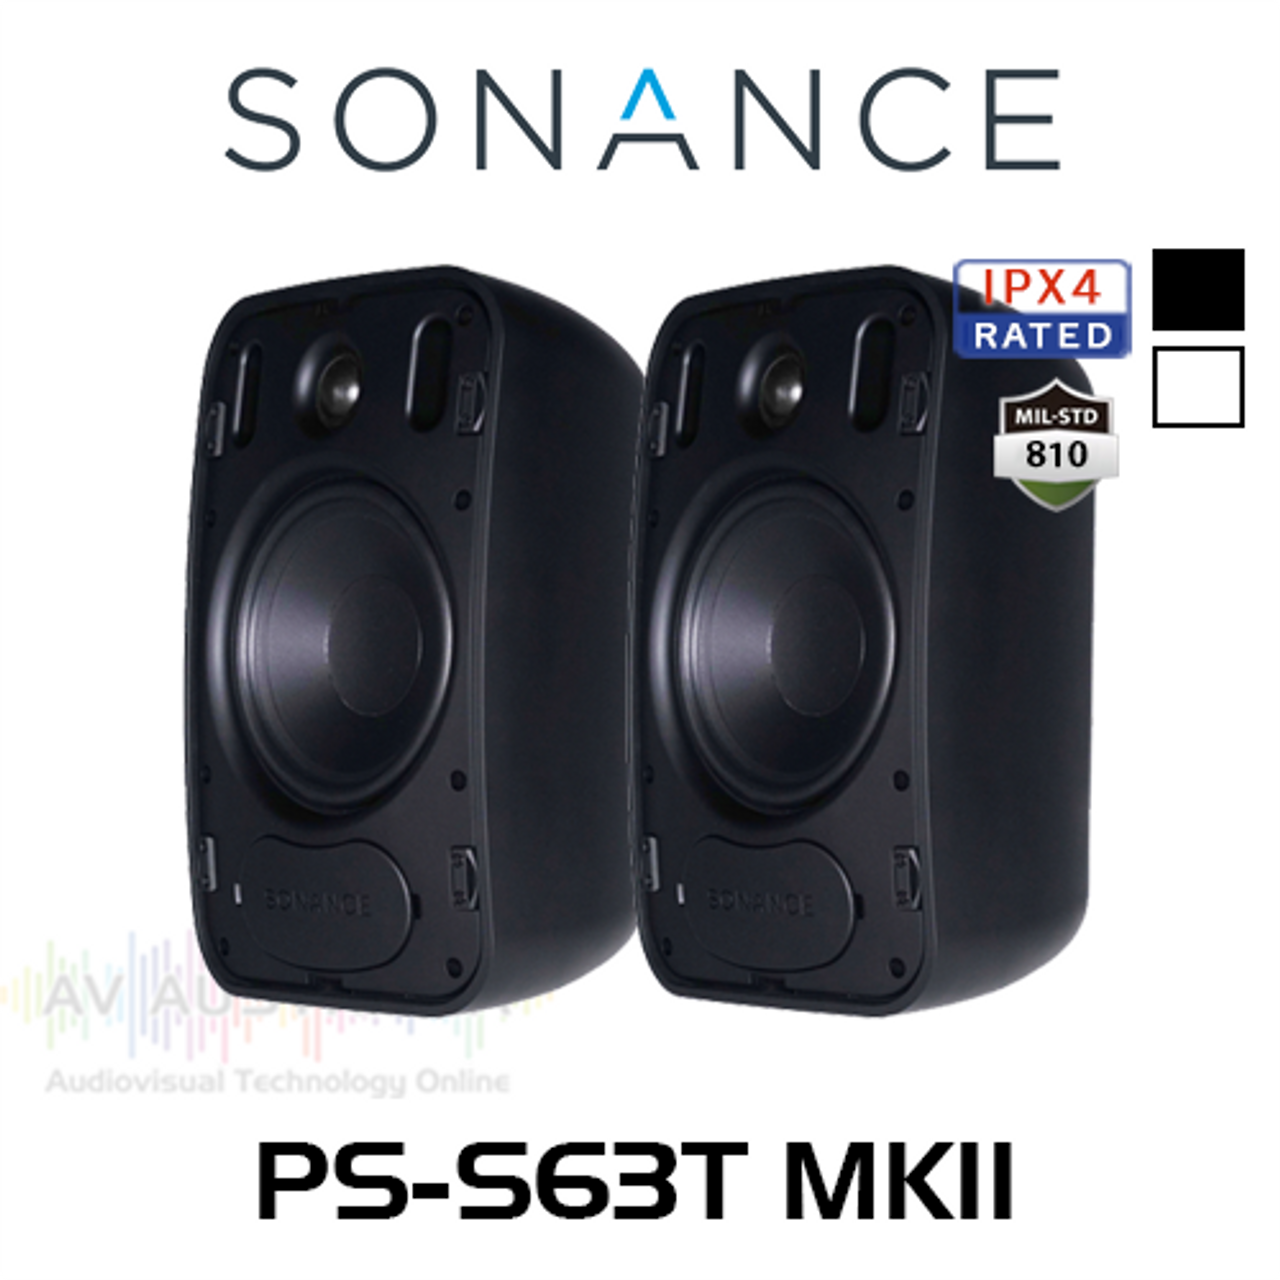 Sonance PS-S63T MKII 6.5" 70/100V Outdoor Surface Mount Speakers (Pair)